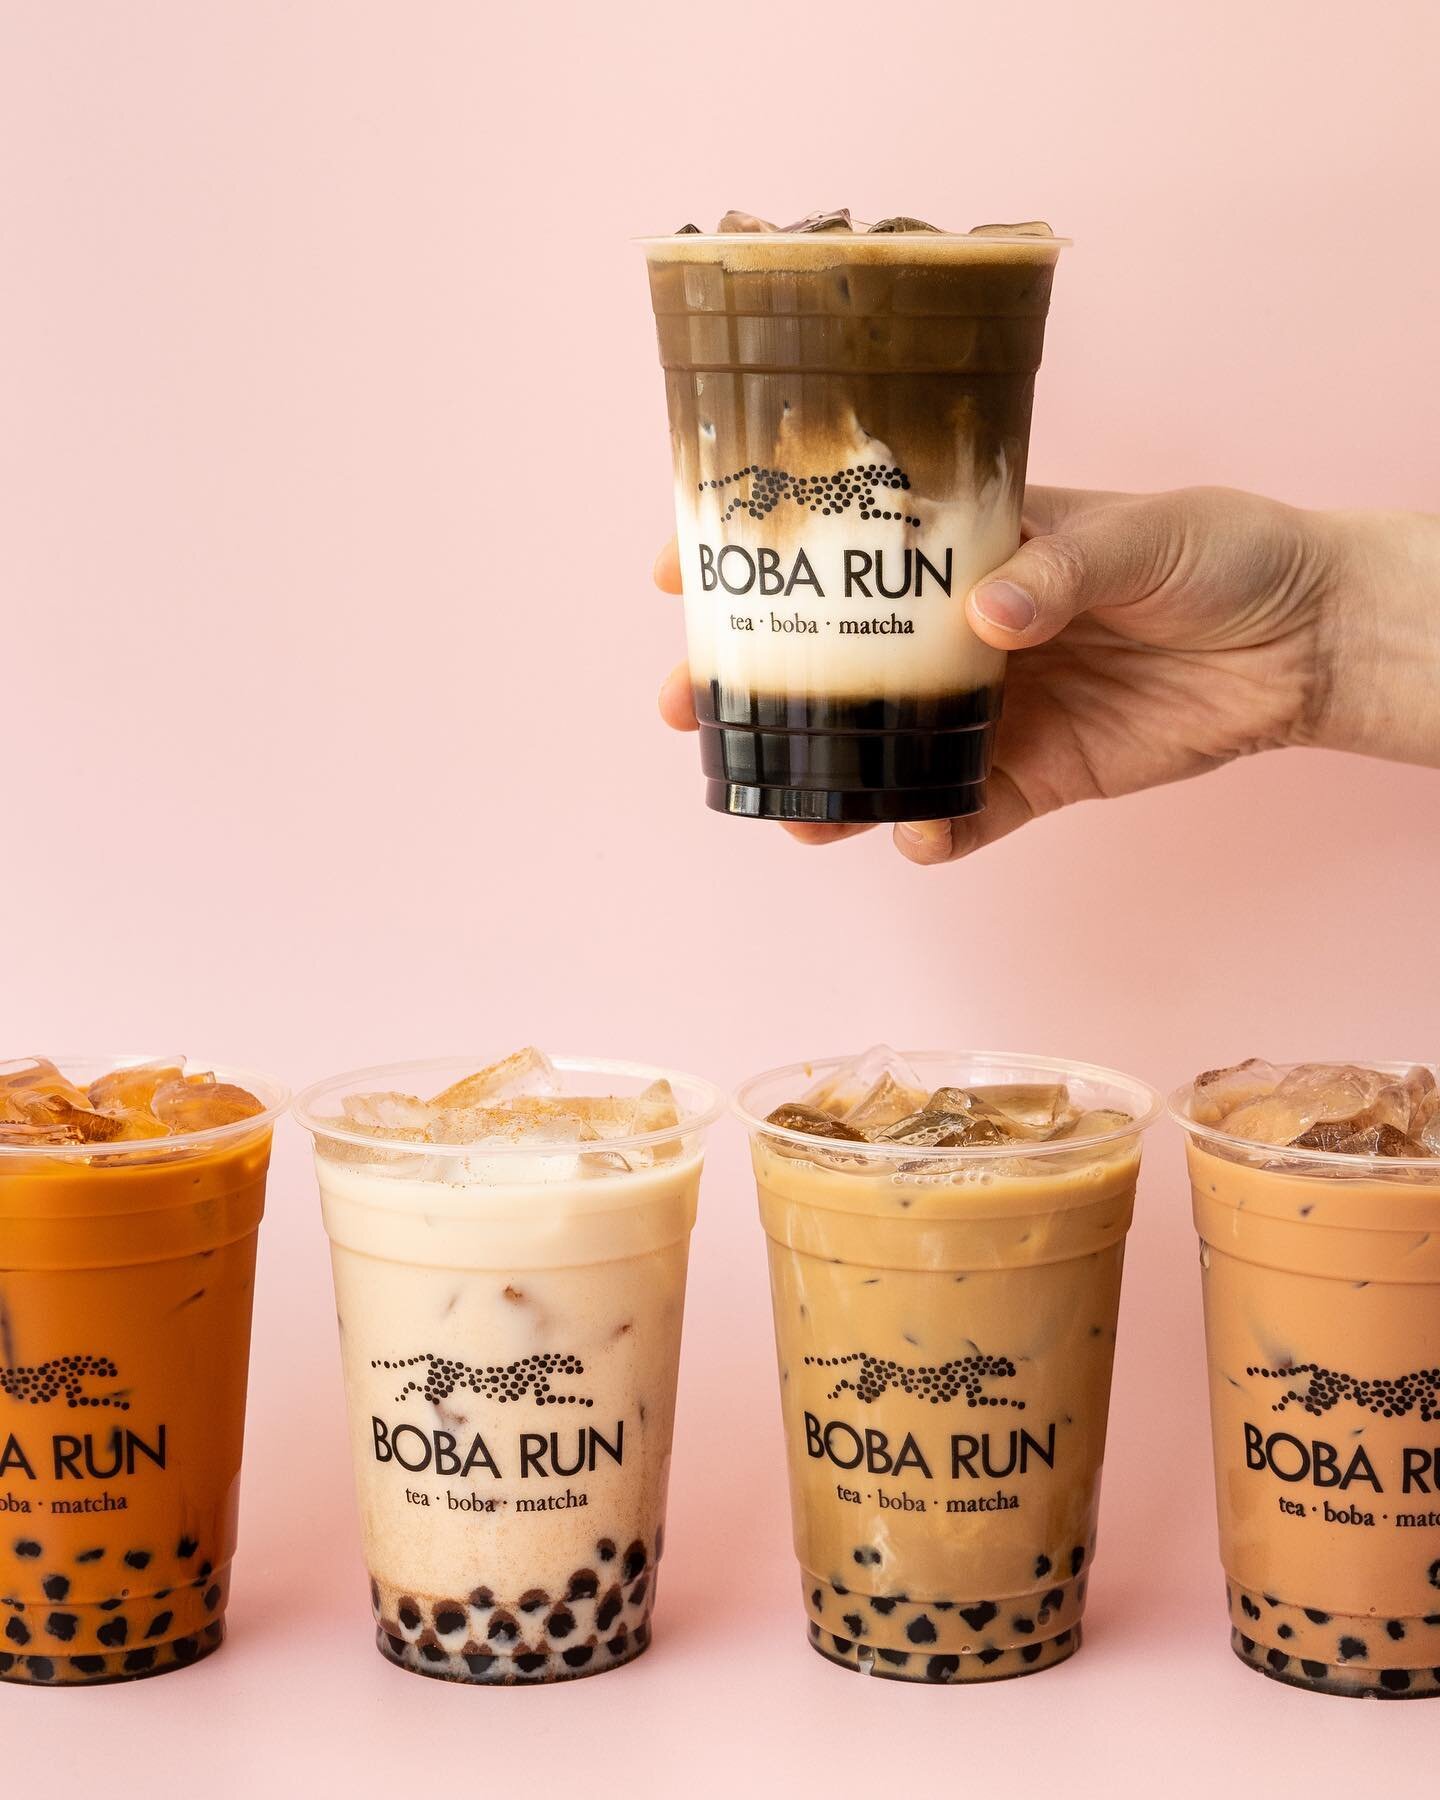 FIVE DAYS, 5 SPECIALS, 5 DOLLARS!
⁠
MONDAY TO FRIDAY WE OFFER $5 SPECIALS!⁠
⁠
MONDAY - HOJICHA LATTE⁠
TUESDAY - HK STYLE MILK TEA⁠
WEDNESDAY - GENMAICHA
THURSDAY - HORCHATA⁠
FRIDAY - VIETNAMESE CAFE SUA DA⁠
⁠
Additional charge for milk alternatives a